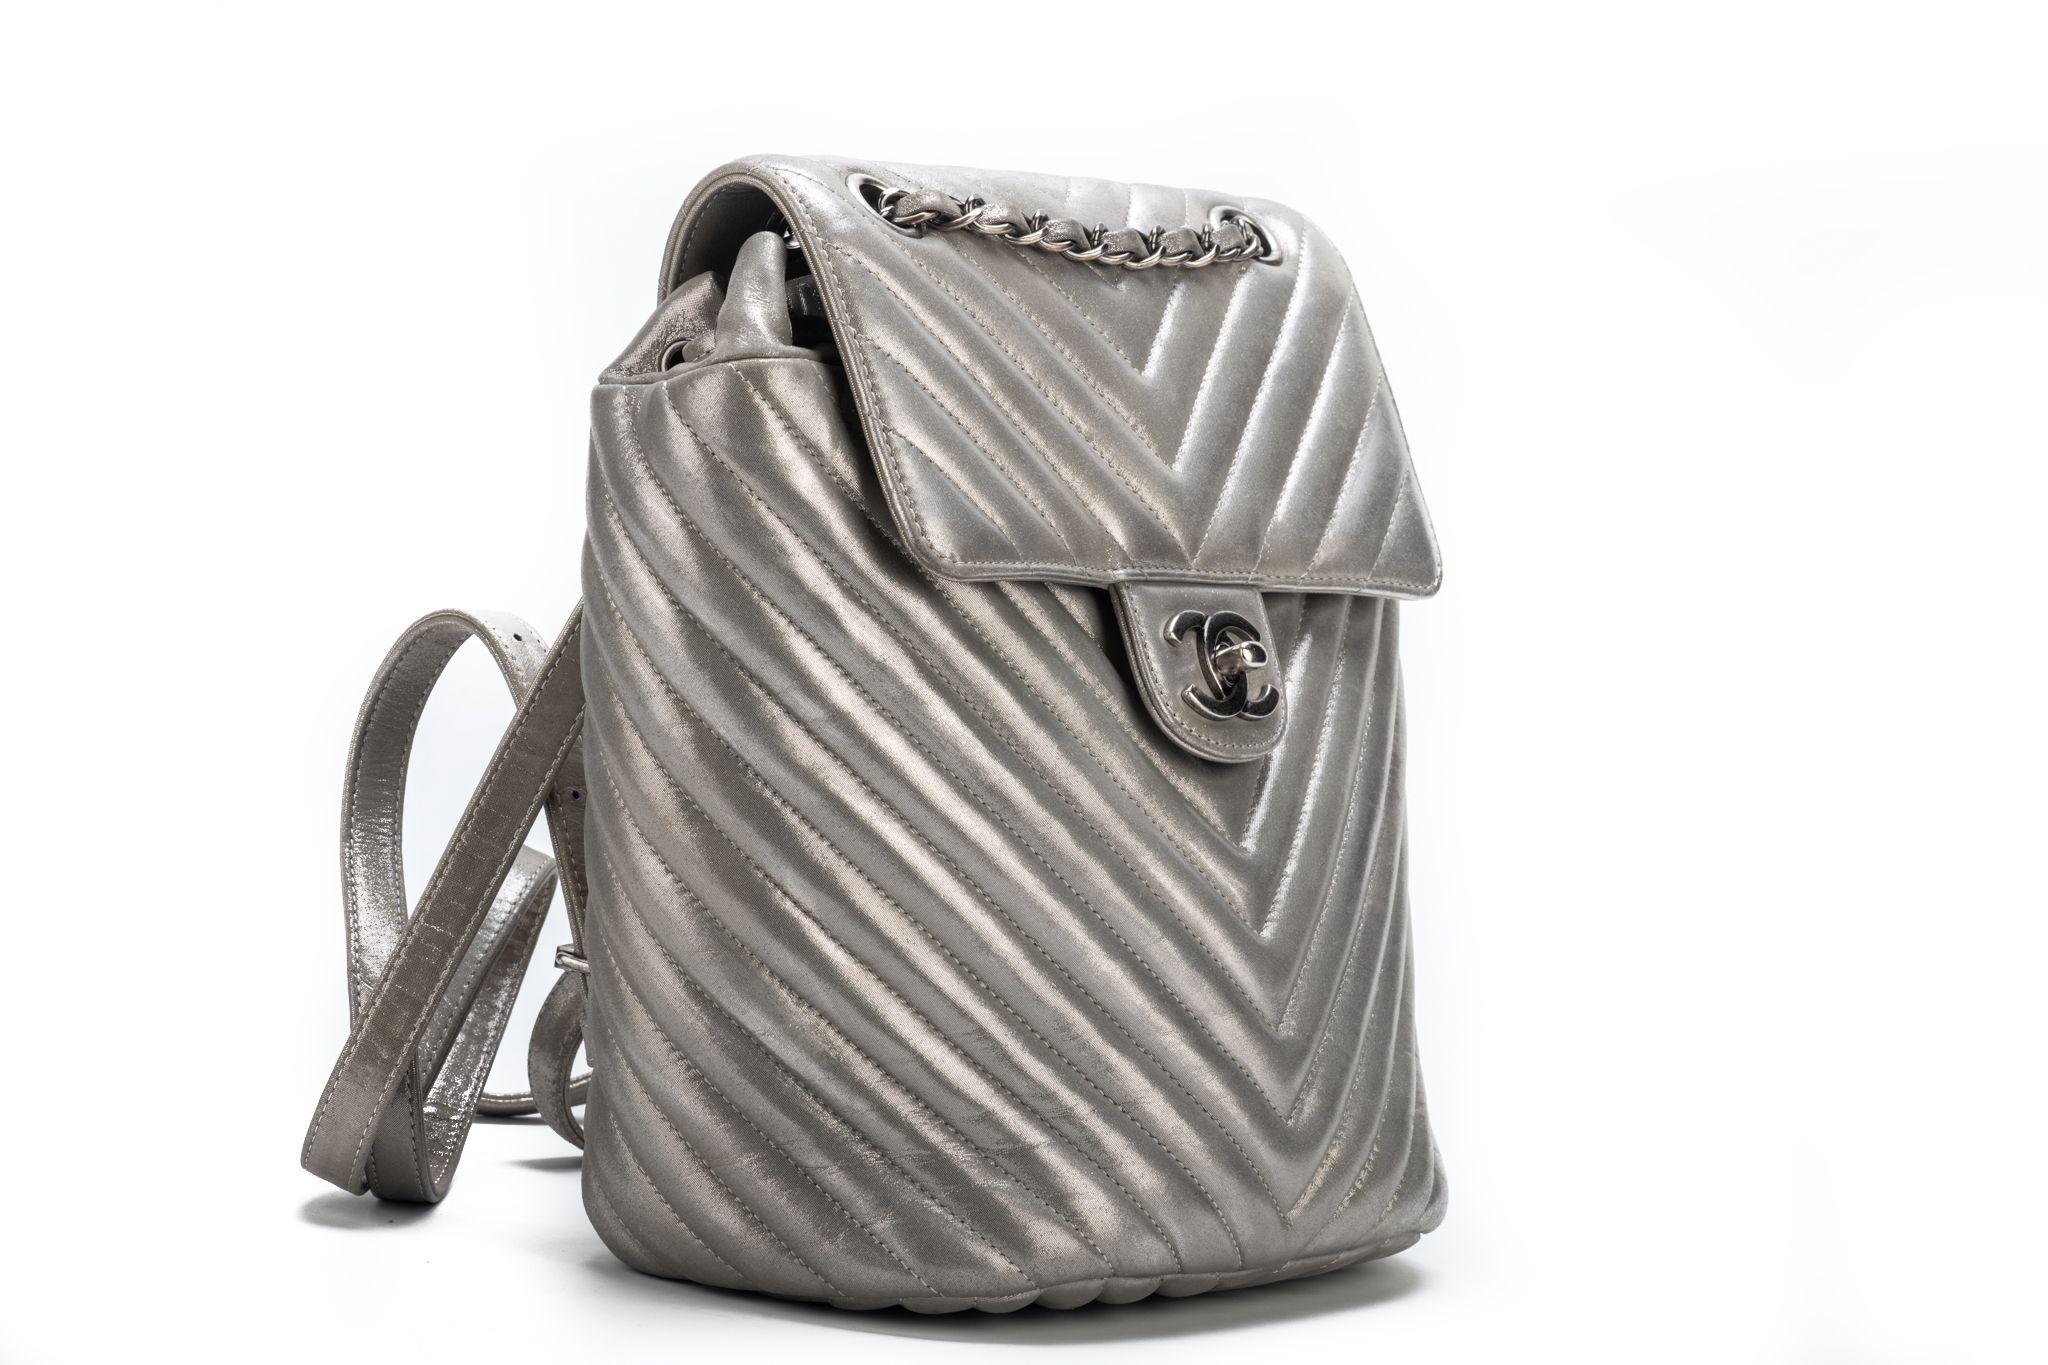 Chanel mint condition silver lambskin chevron backpack. Handle drop 4”, adjustable straps. Comes with hologram, card and original dust cover. Collection 22.
